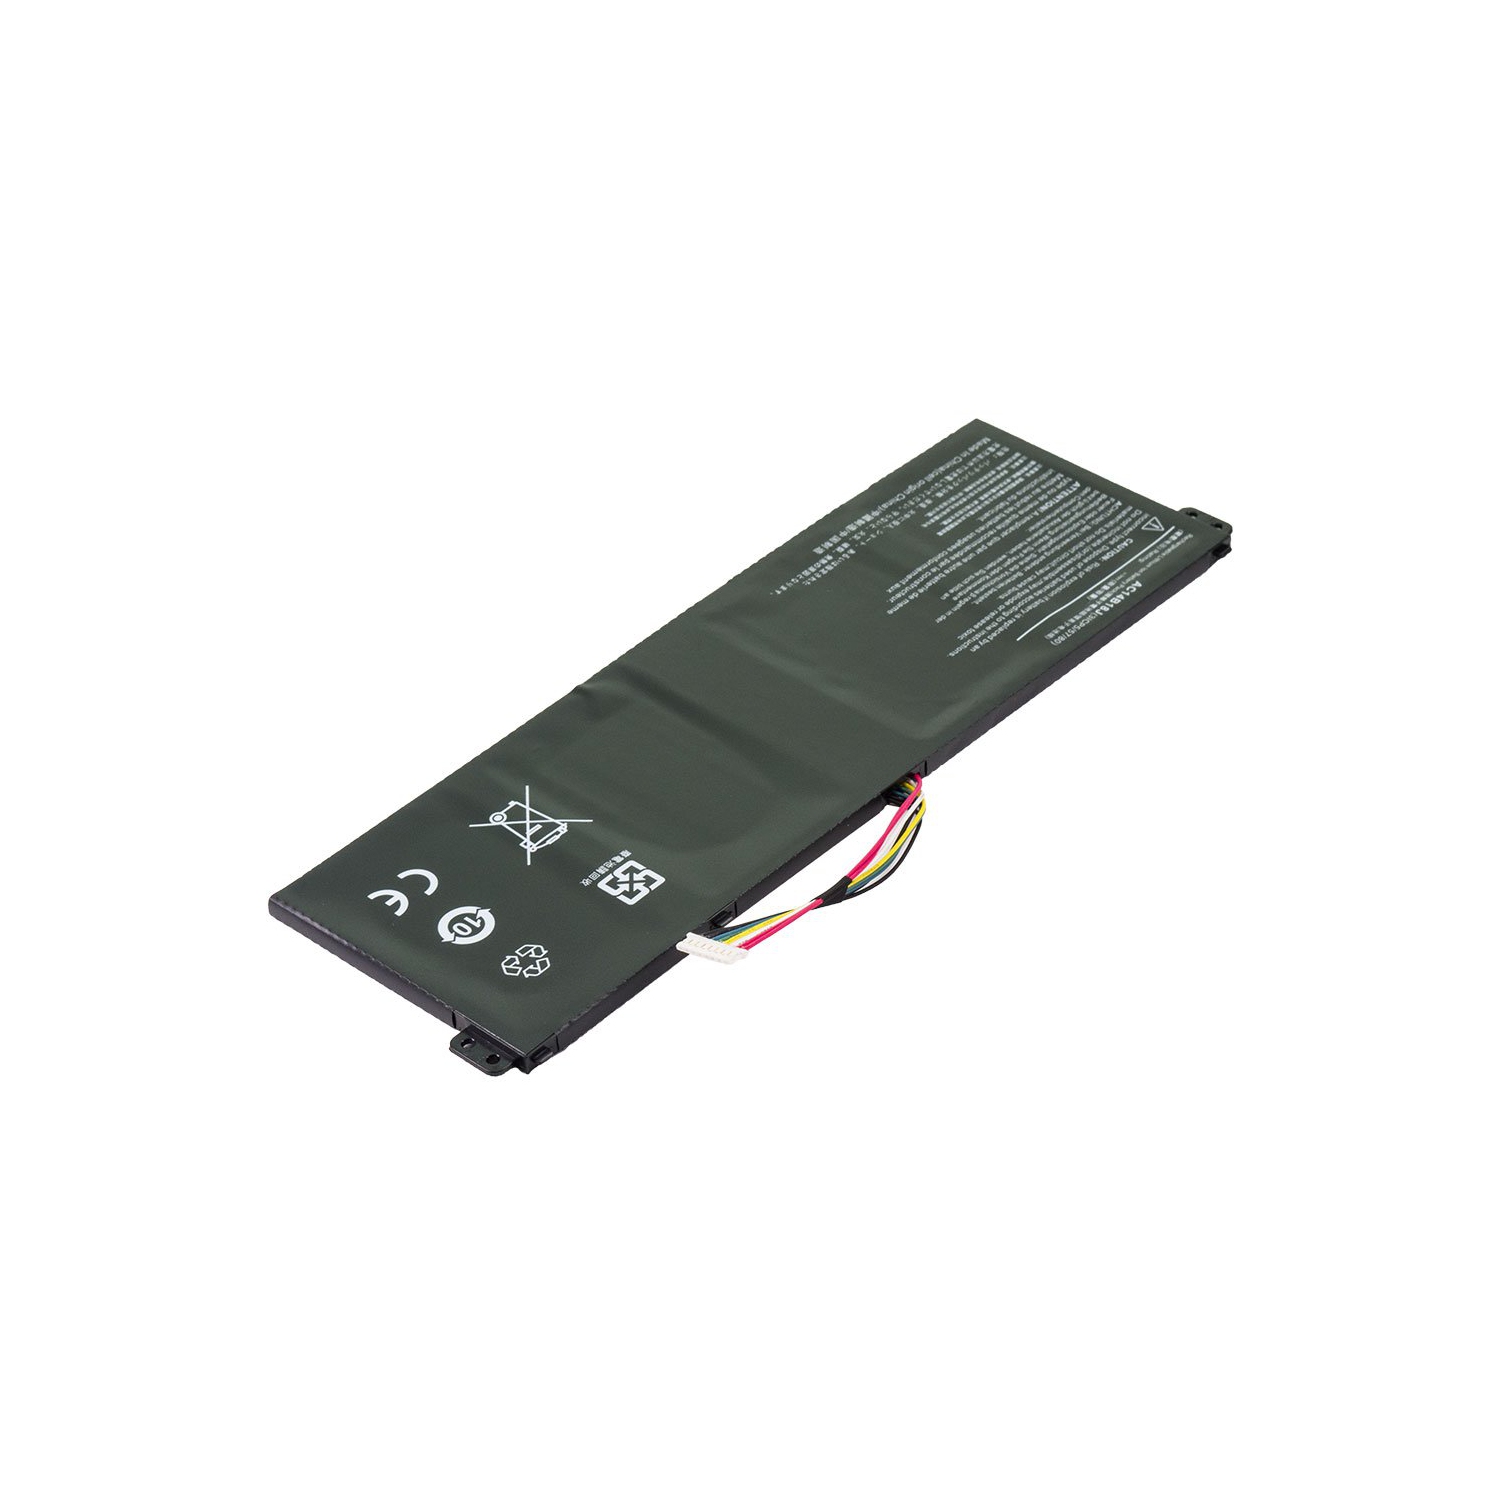 Laptop Battery Replacement for Acer Aspire ES1-731-P9RR, 3ICP5/57/80, AC14B13J, AC14B18J